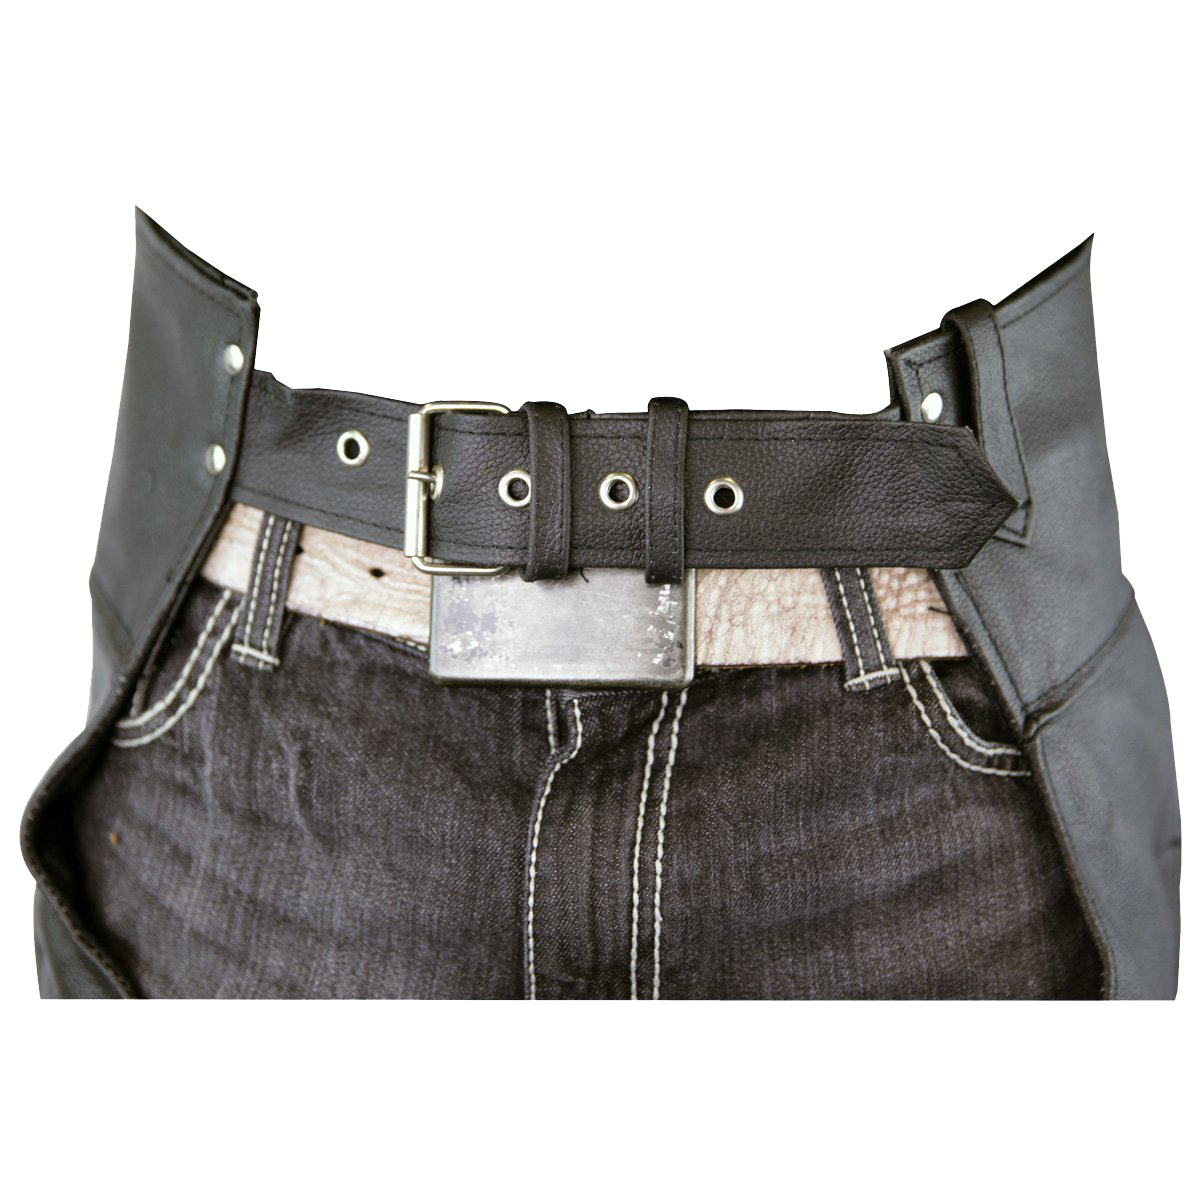 VL805S Zip-Out Insulated and Lined Plain Biker Leather Chaps